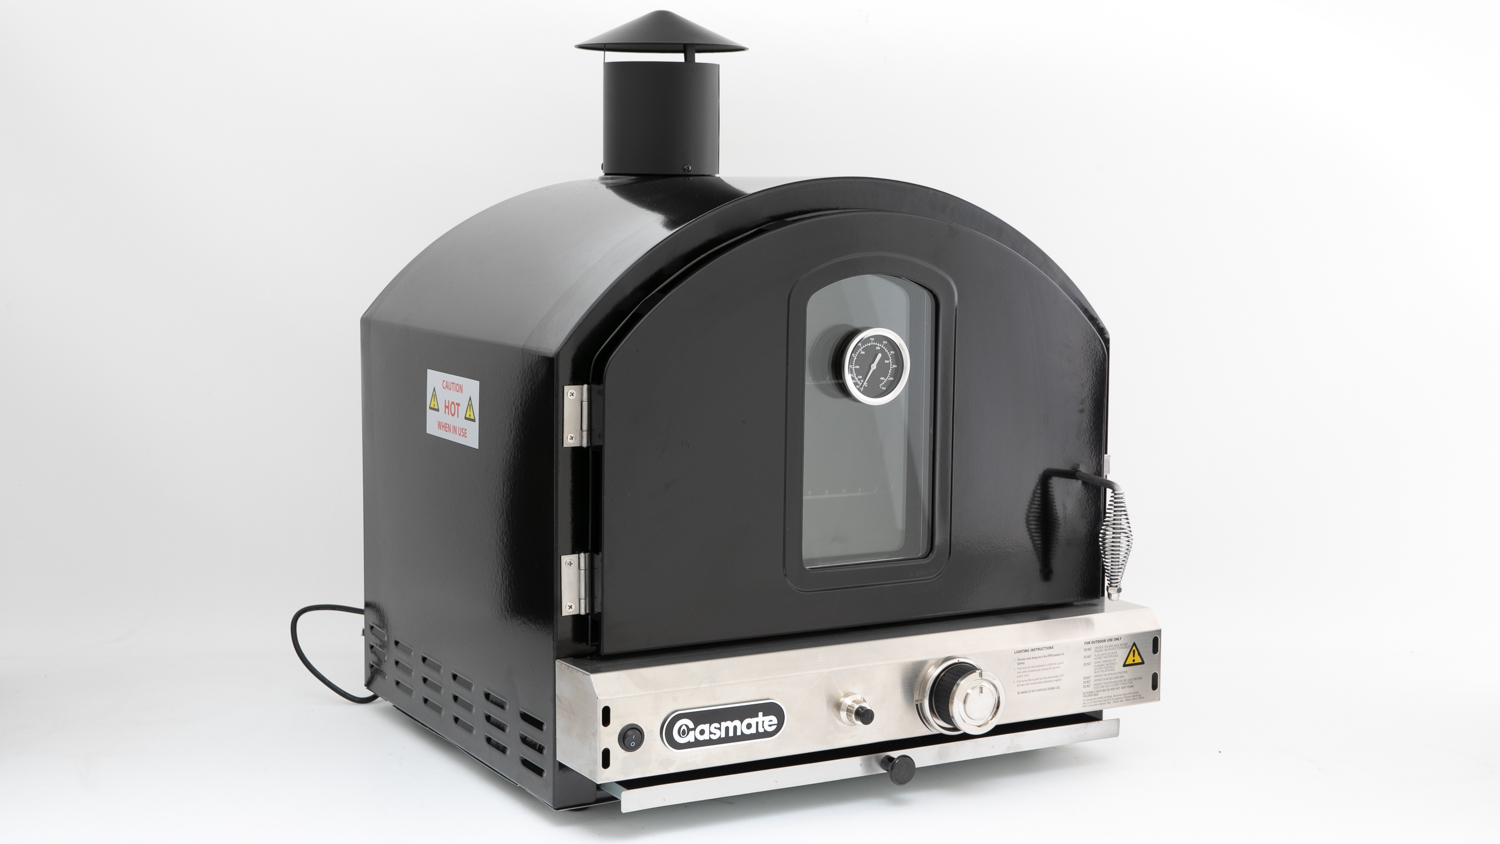 Gasmate PO106 Deluxe Pizza Oven carousel image